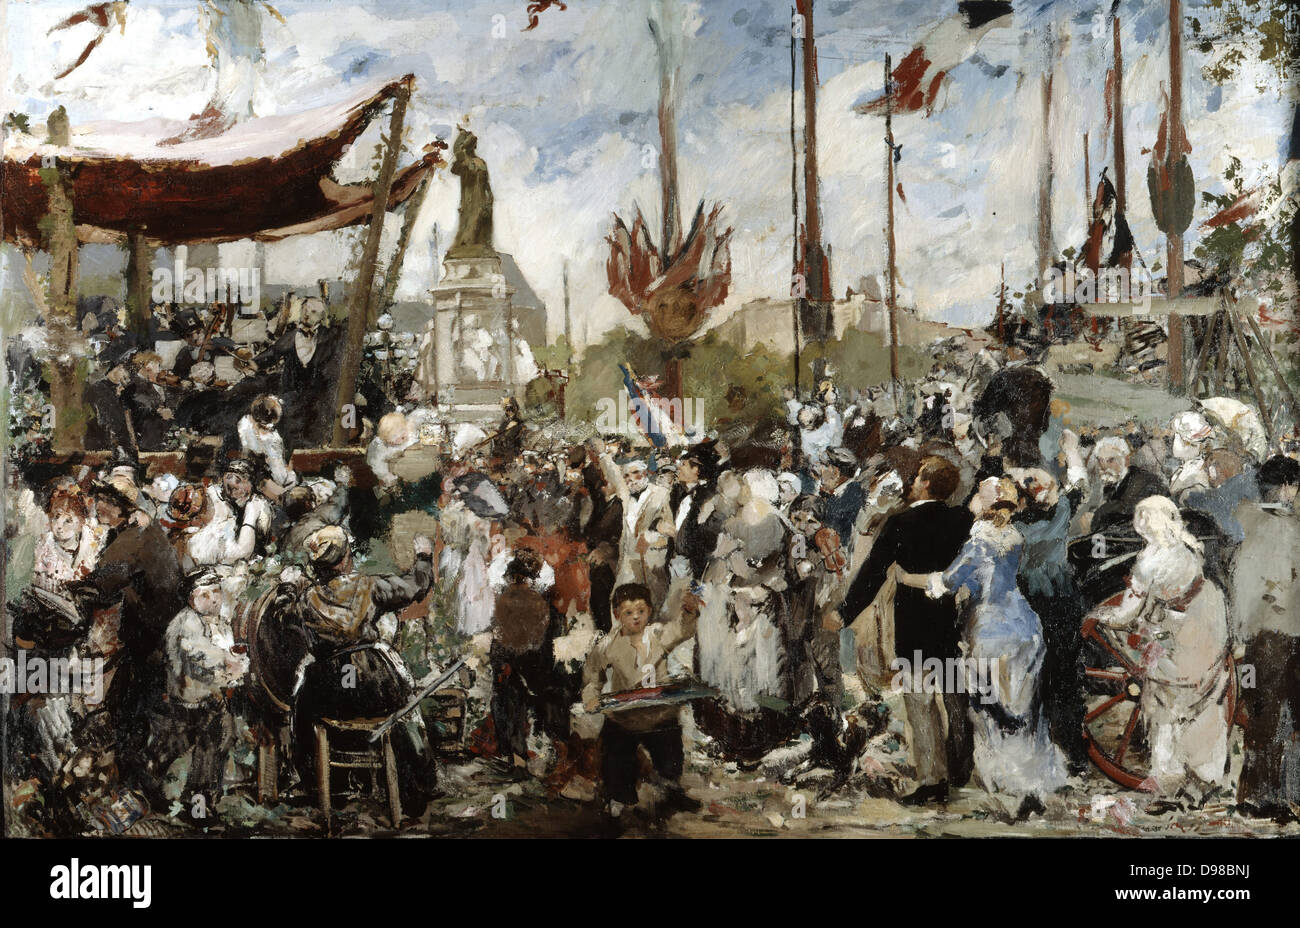 The 14th of July, 1880' study by Alfred Philippe Roll (1846-1919), French painter. The crowds are en fete for 14 July, Bastille Day, a public holiday in France, and are enjoying the music played by the band on the bandstand. Stock Photo